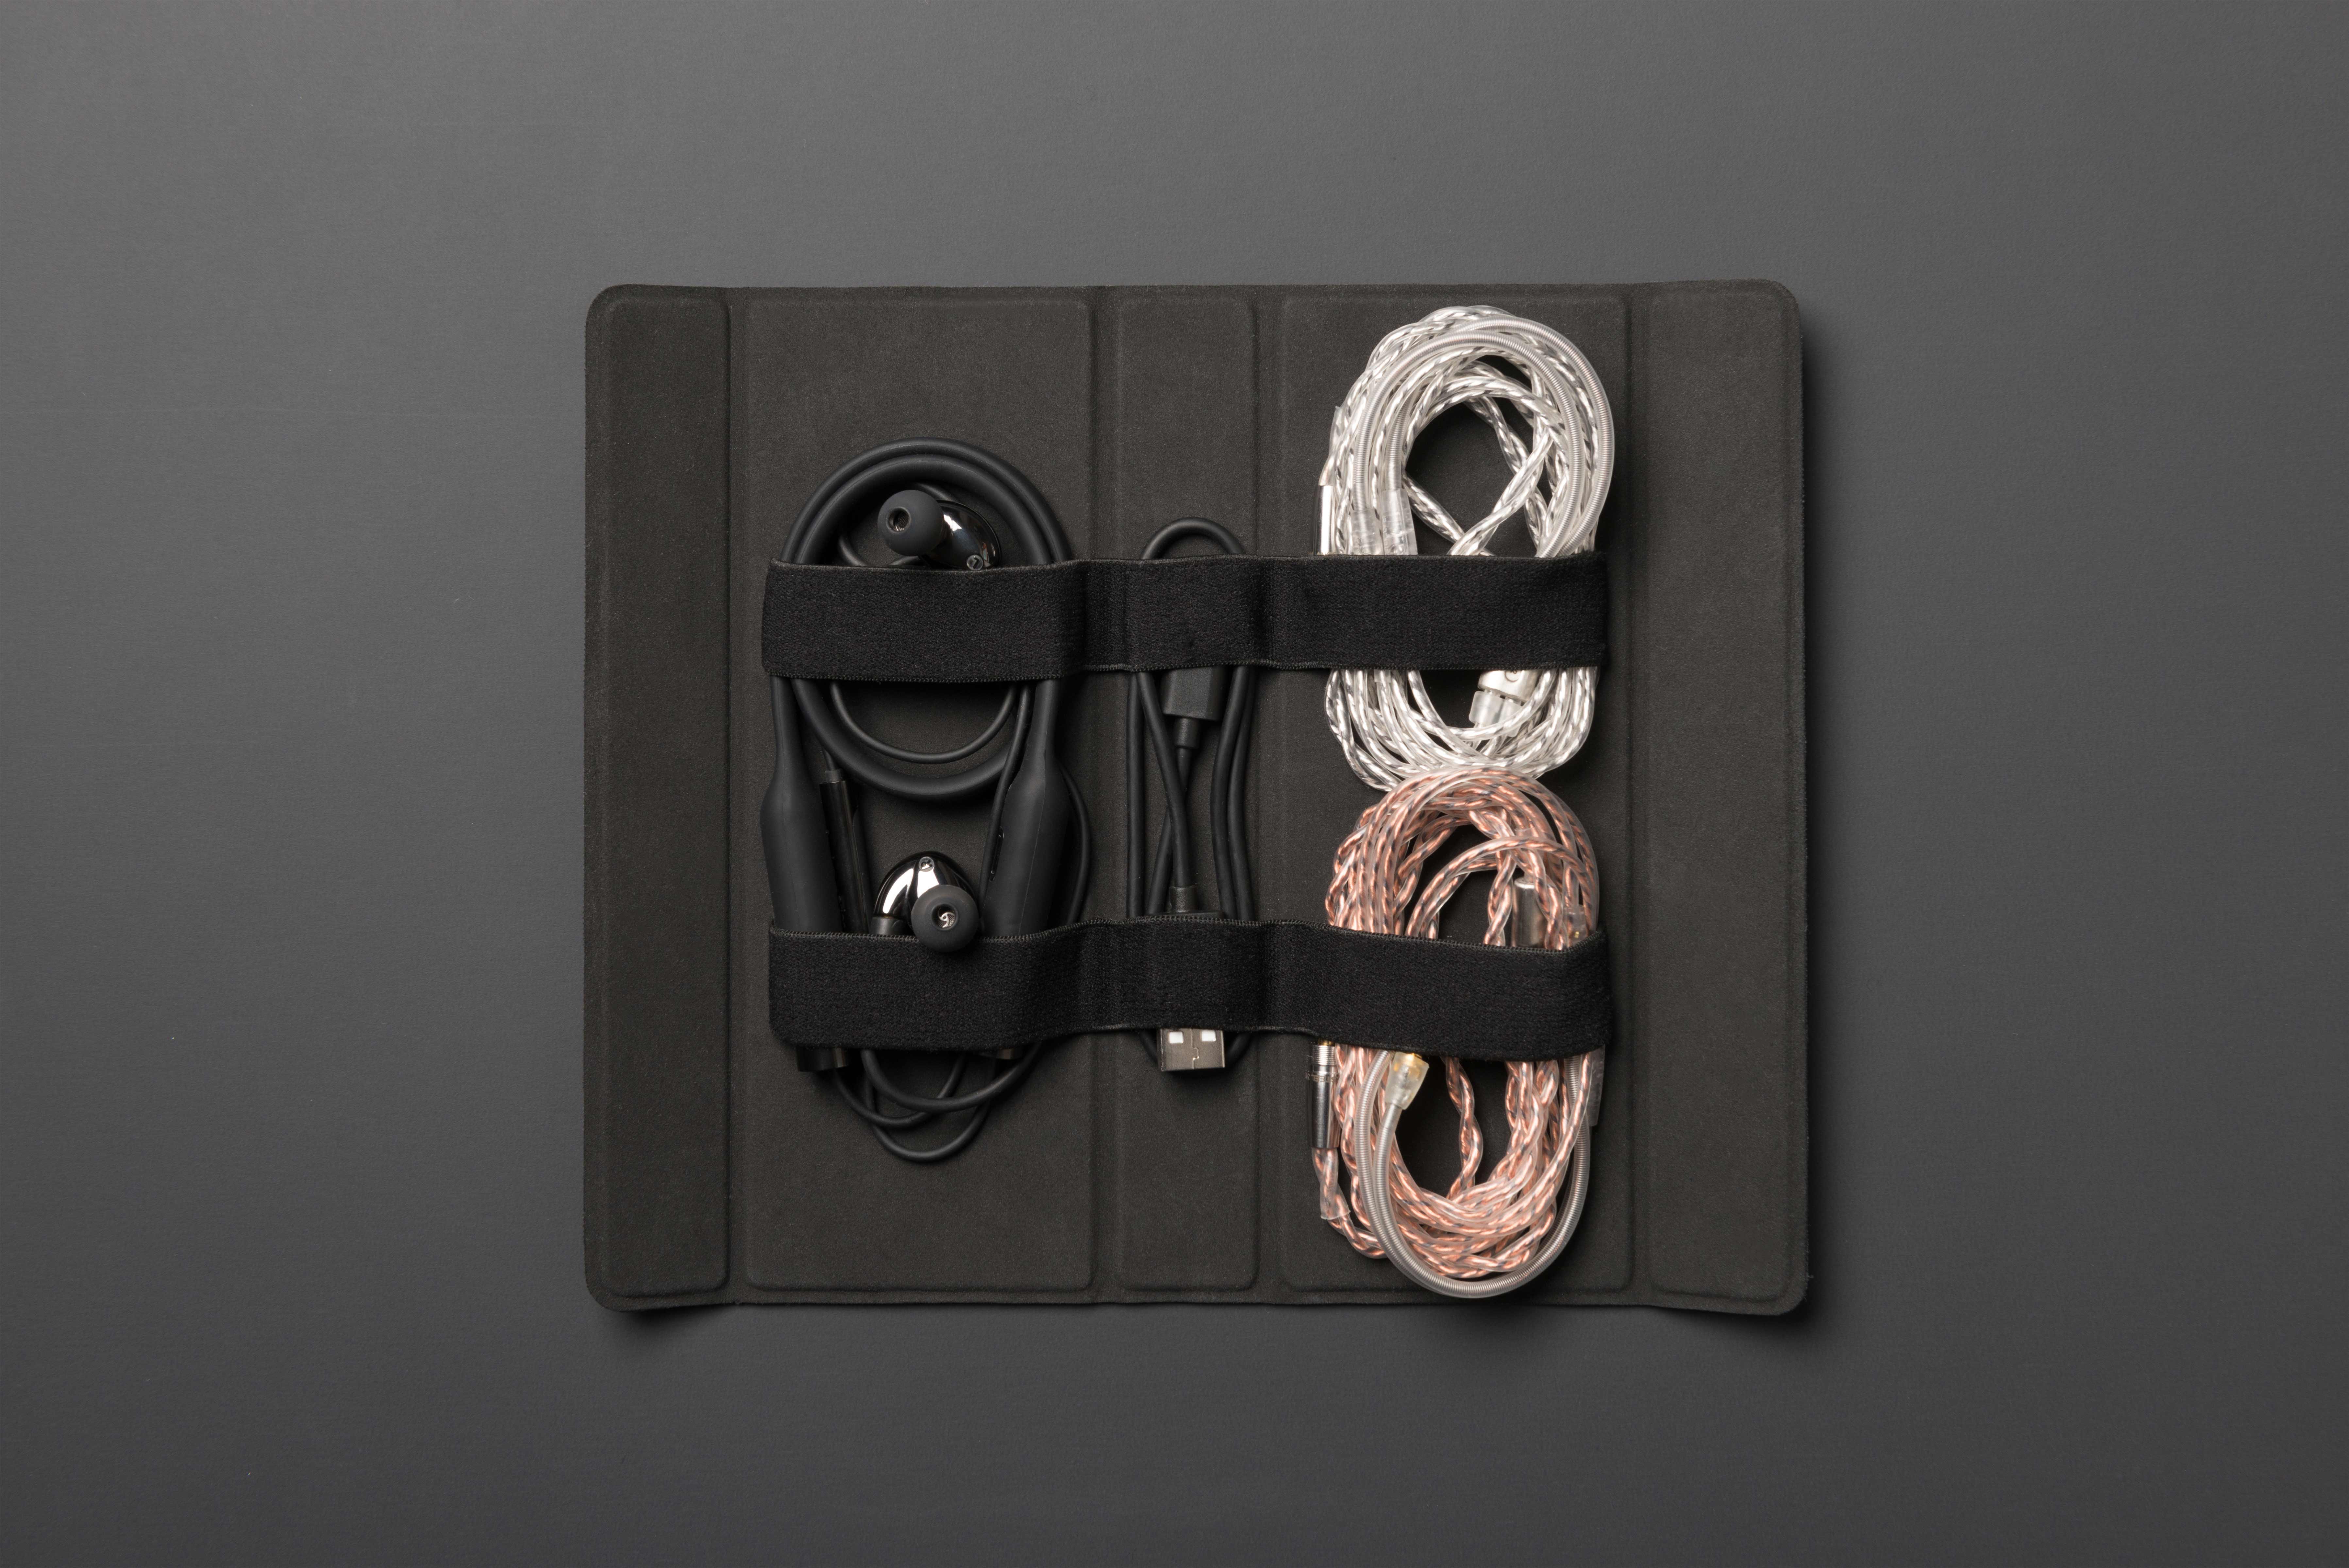 CL2 Planar: the headphones laid out with accessories in case.